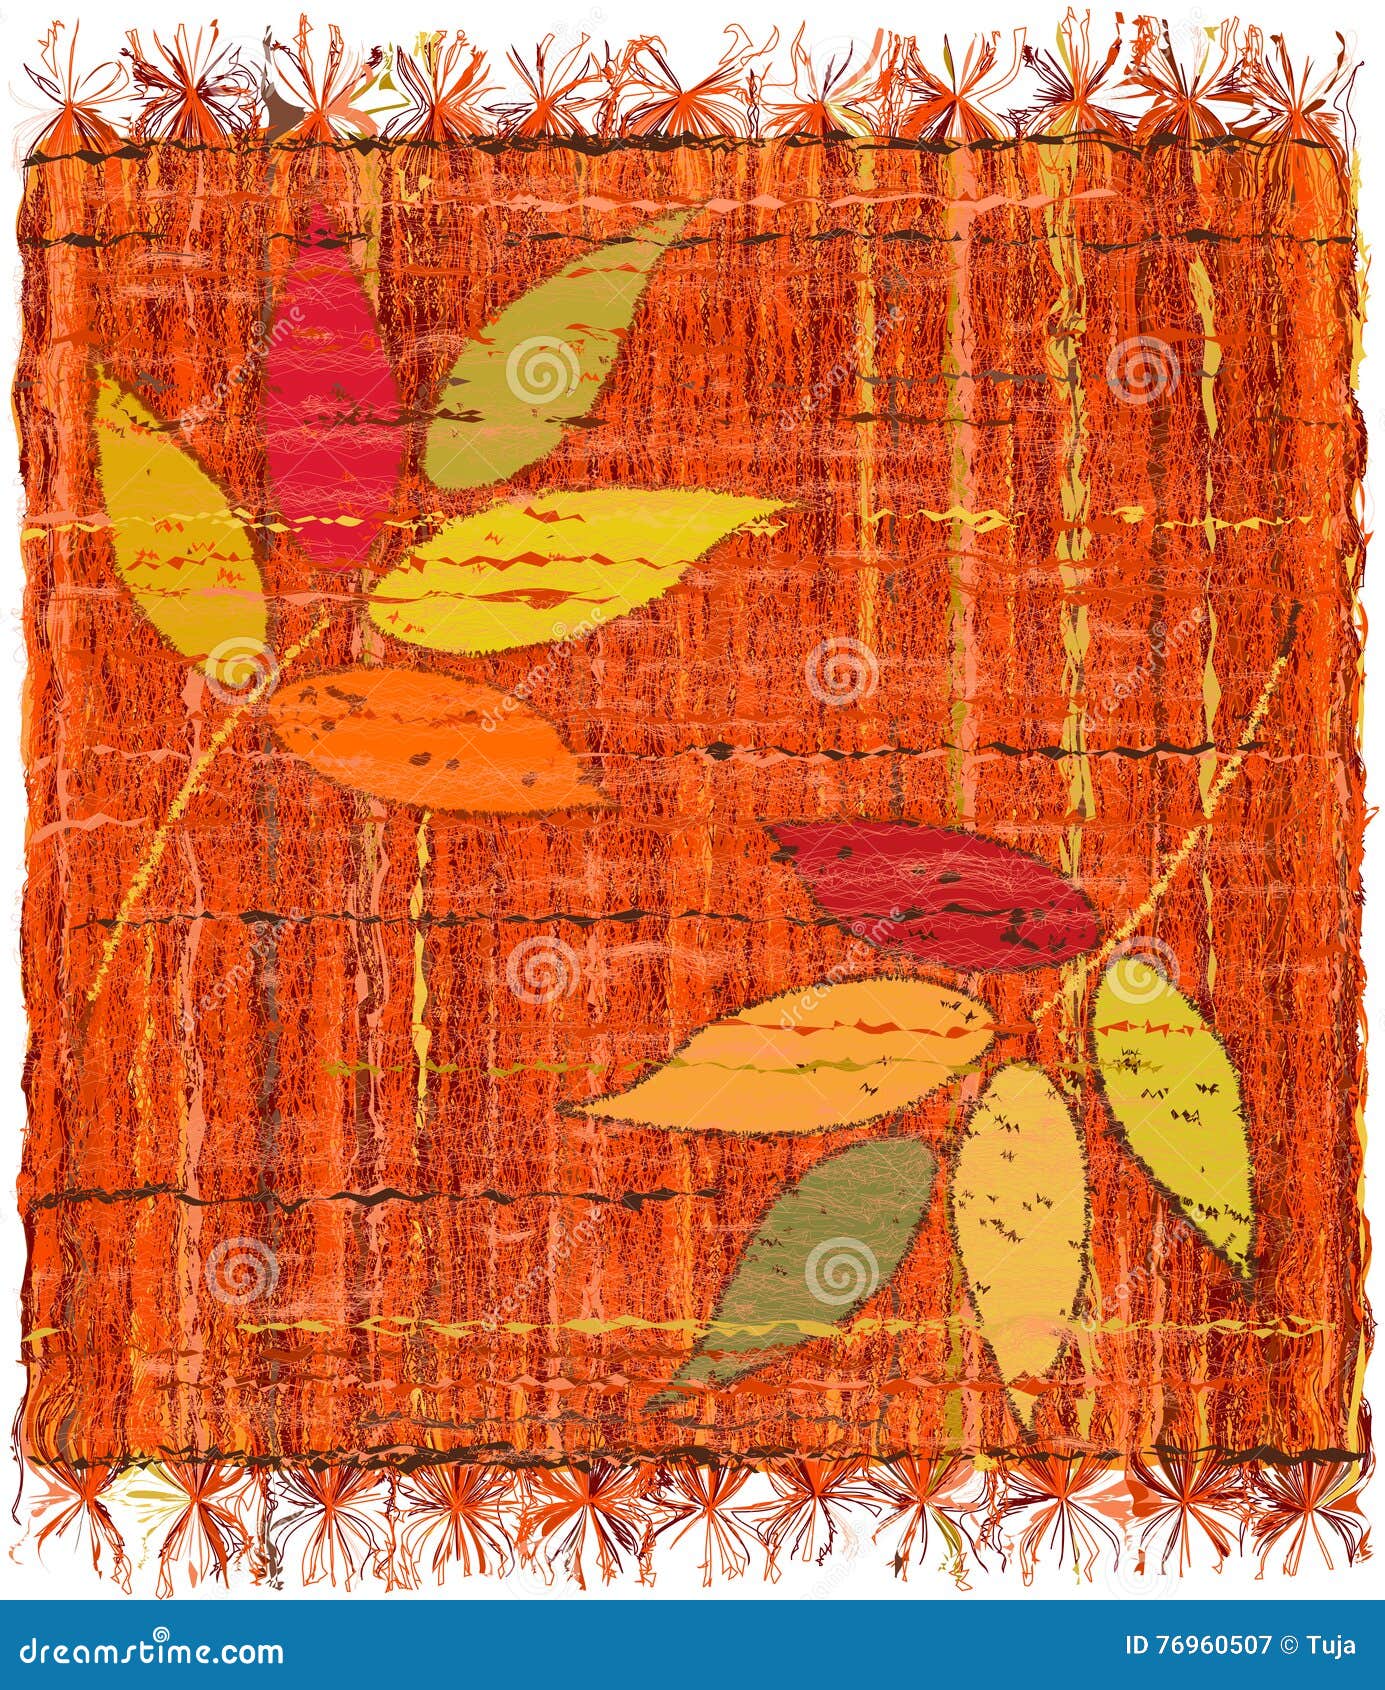 colorful weave interlace plaid with embroidery of stylized leafs